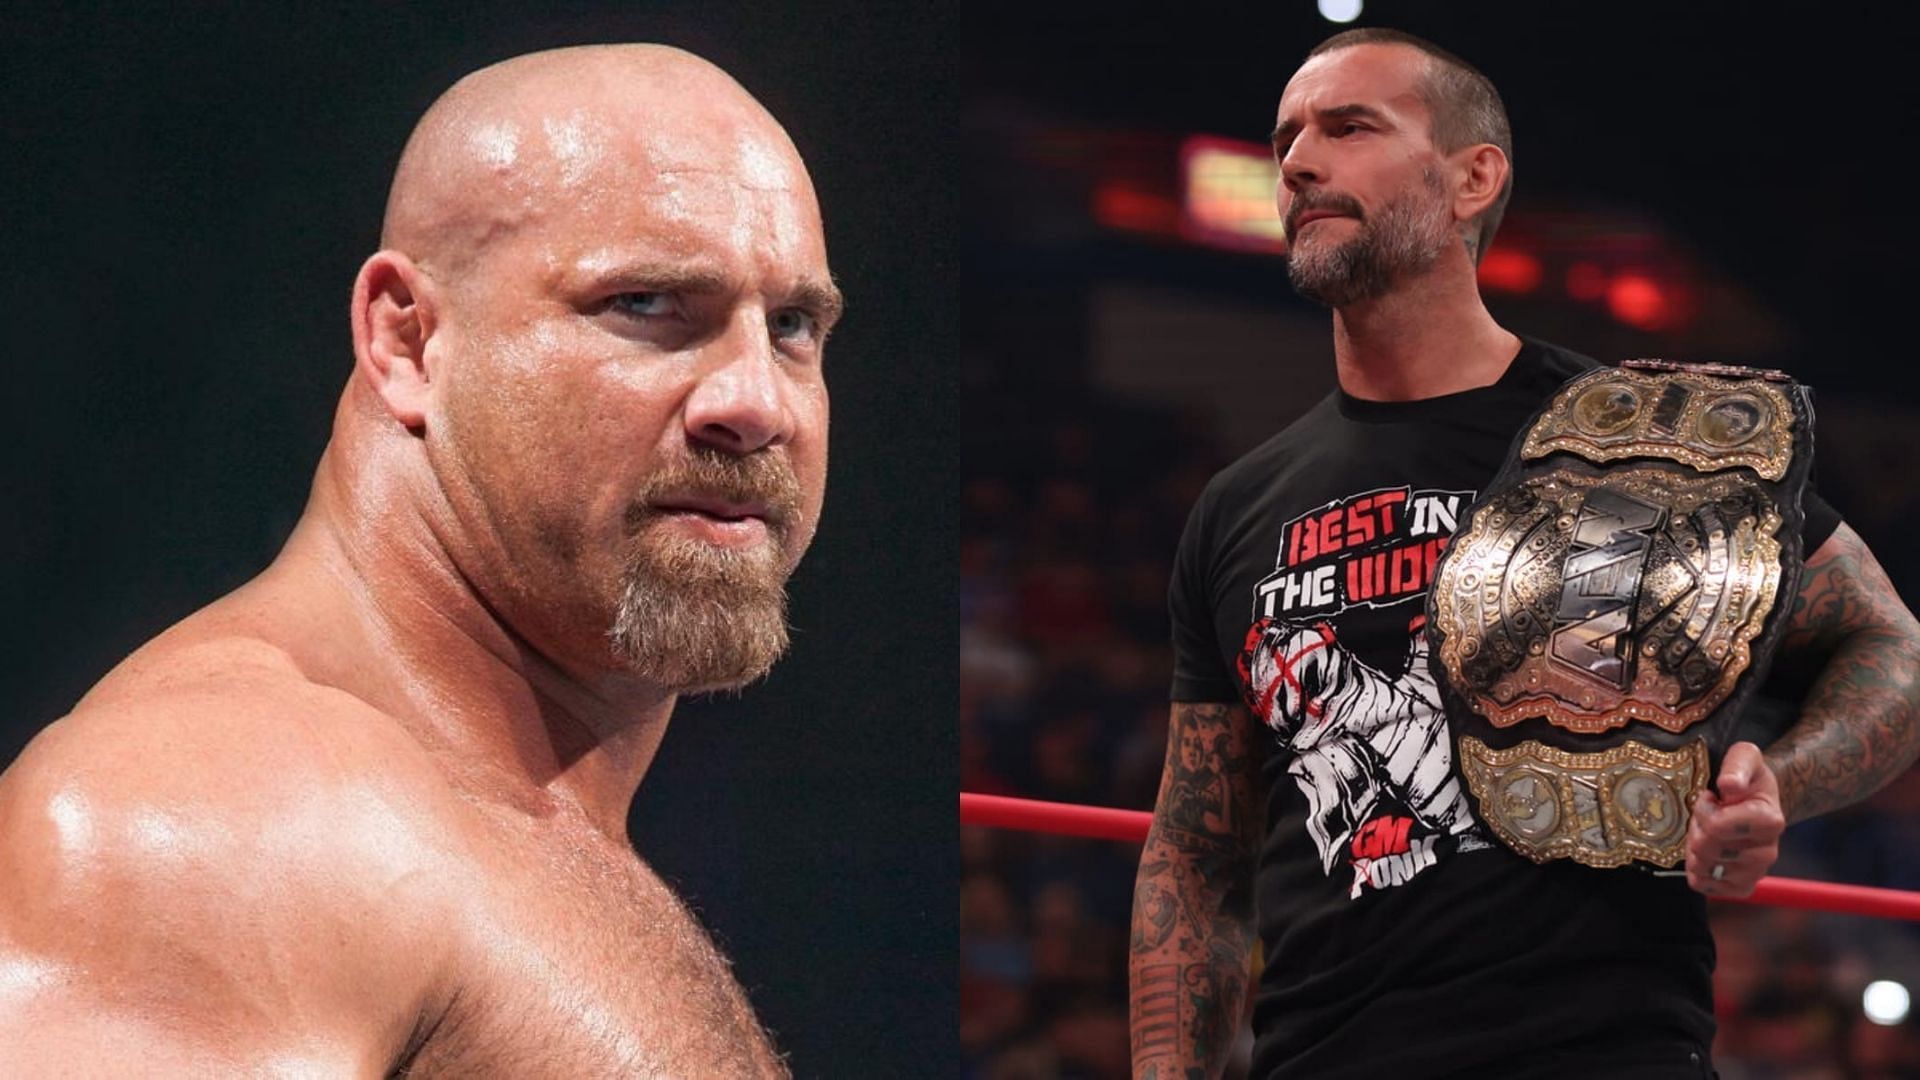 Goldberg (left) and CM Punk (right) could be on a collision course.